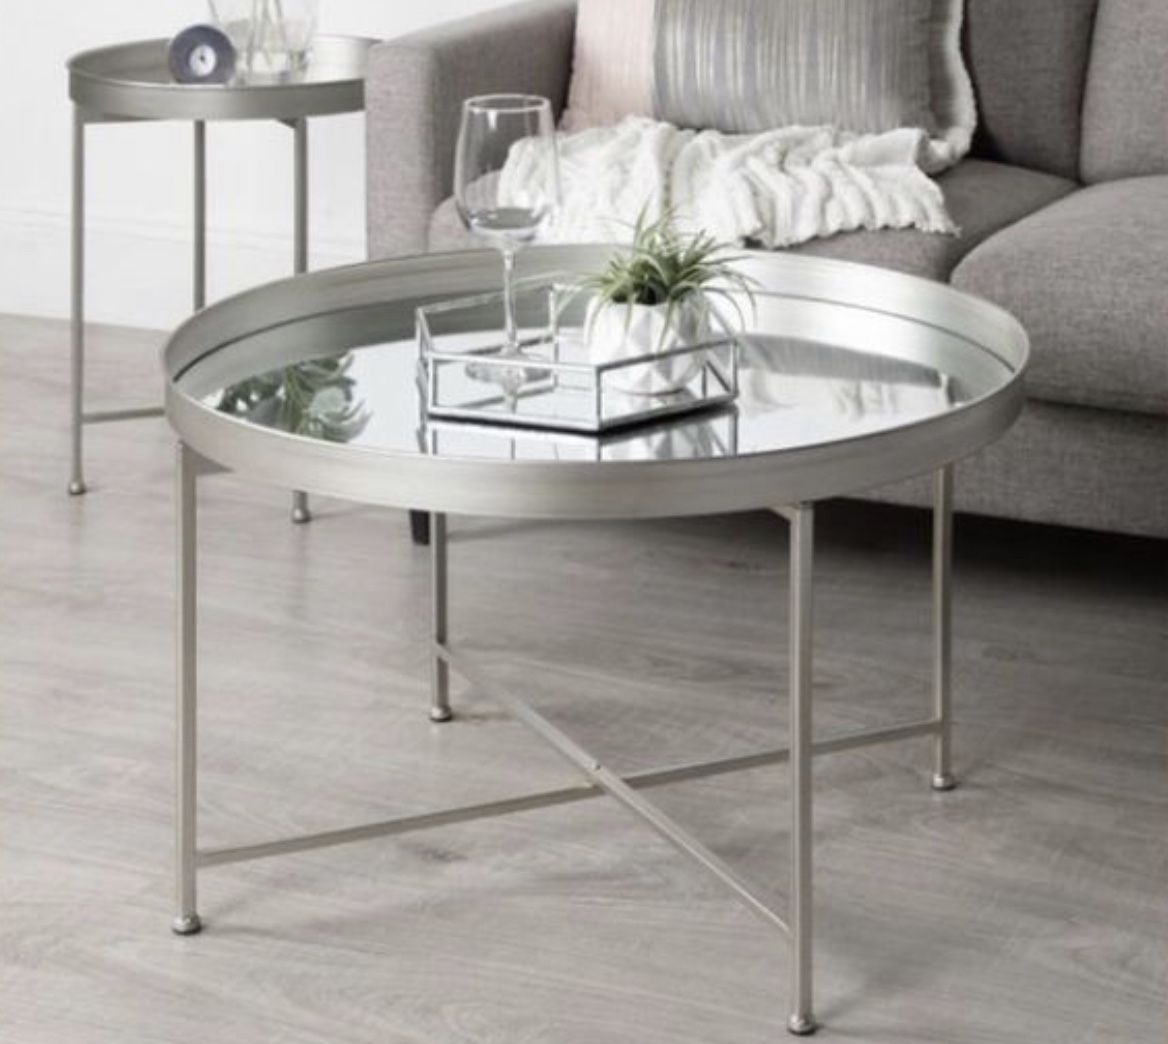 **COFFEE TABLE & 2 SIDE TABLES - BRAND NEW!**